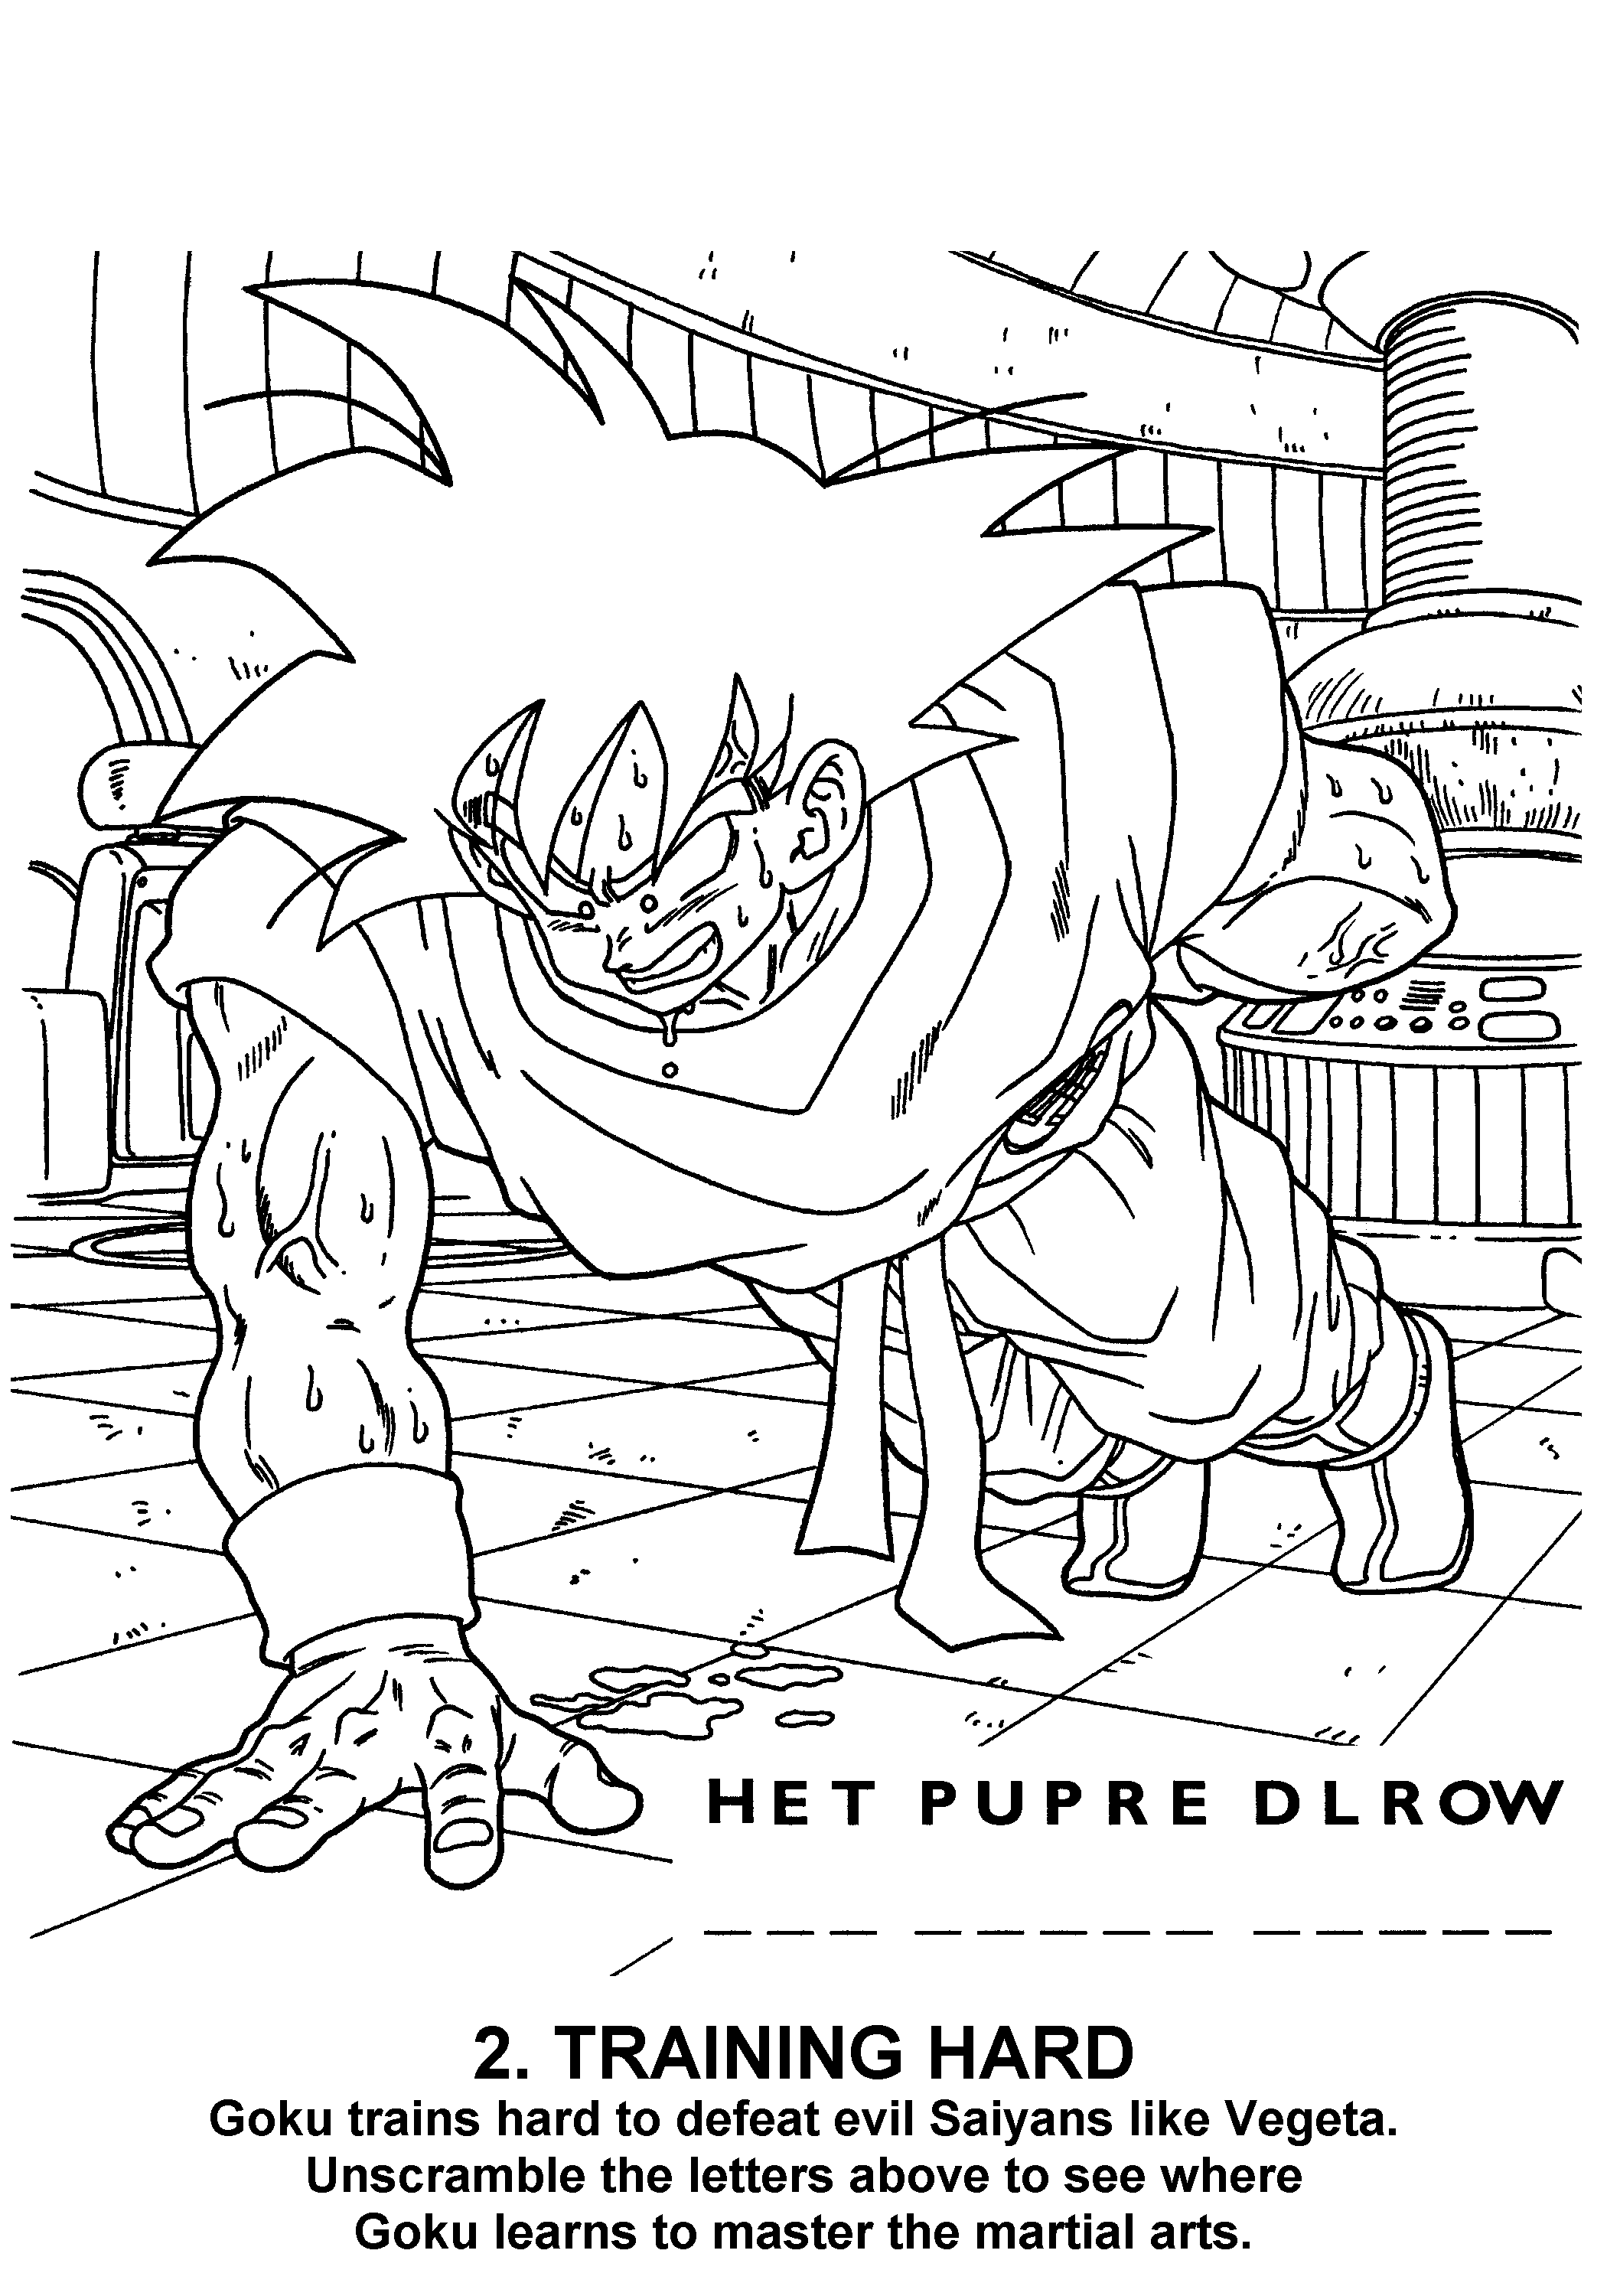 animated-coloring-pages-dragon-ball-z-image-0046